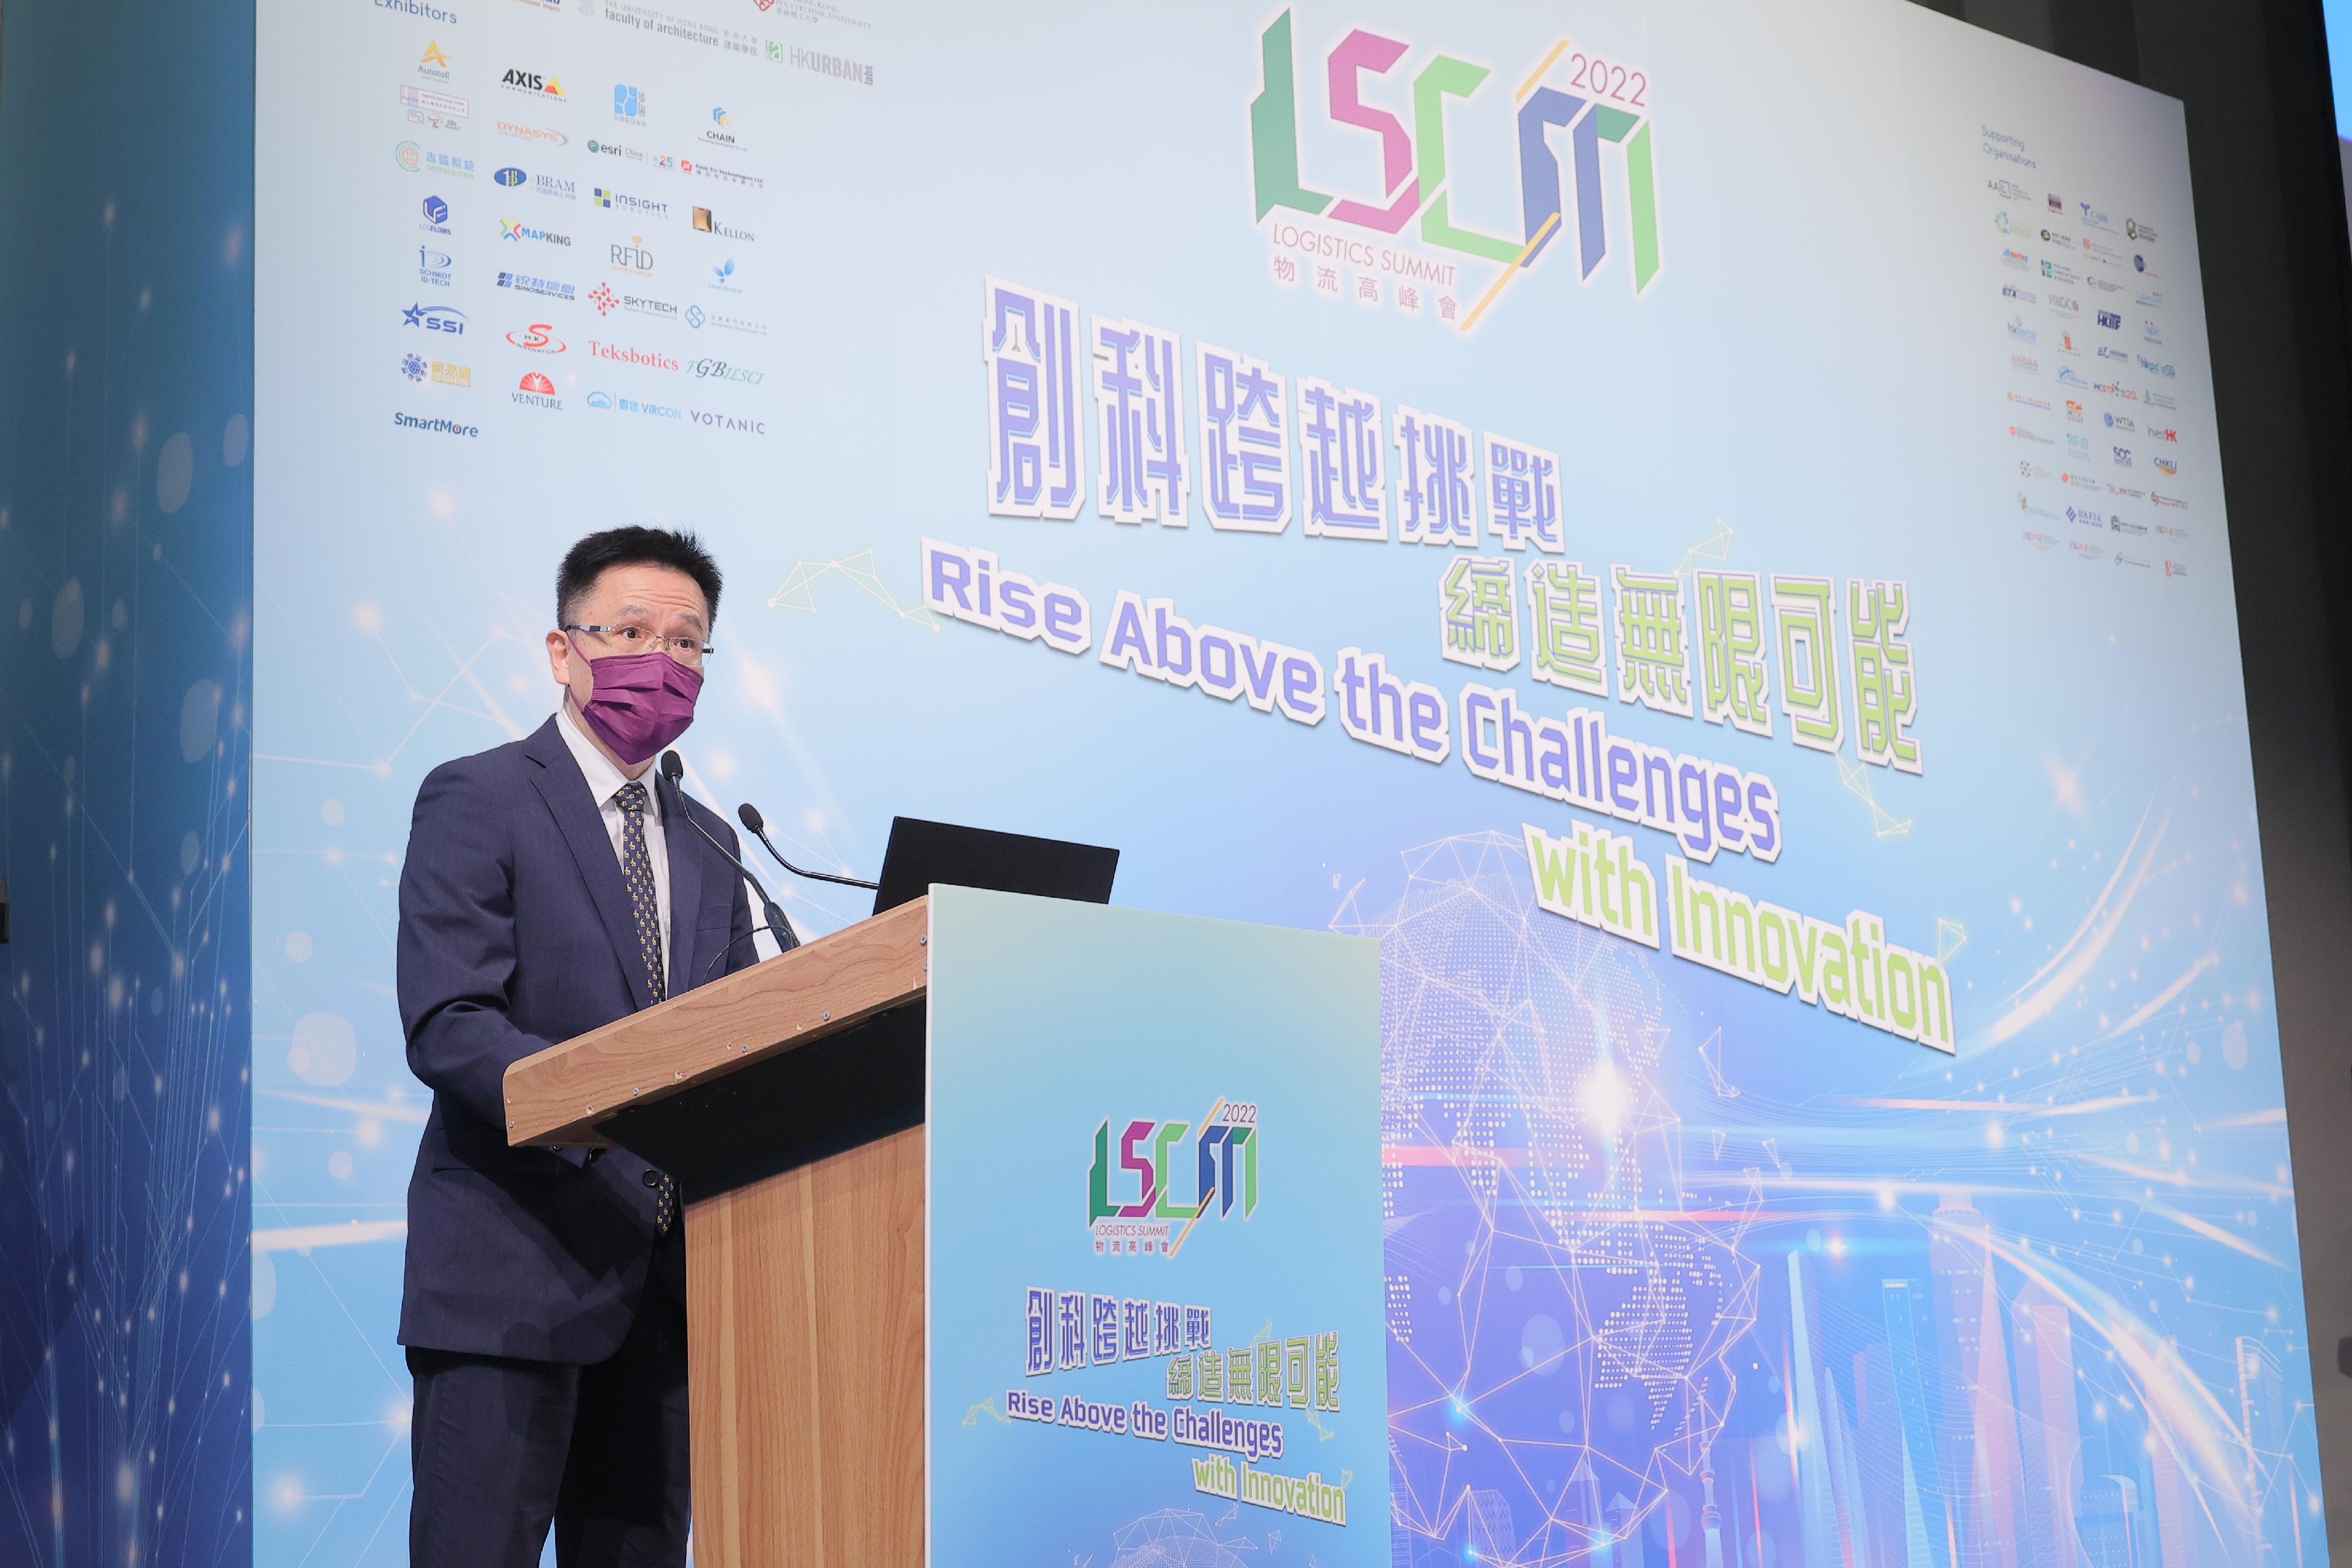 The Secretary for Innovation, Technology and Industry, Professor Sun Dong, speaks at the LSCM Logistics Summit 2022 today (September 30).